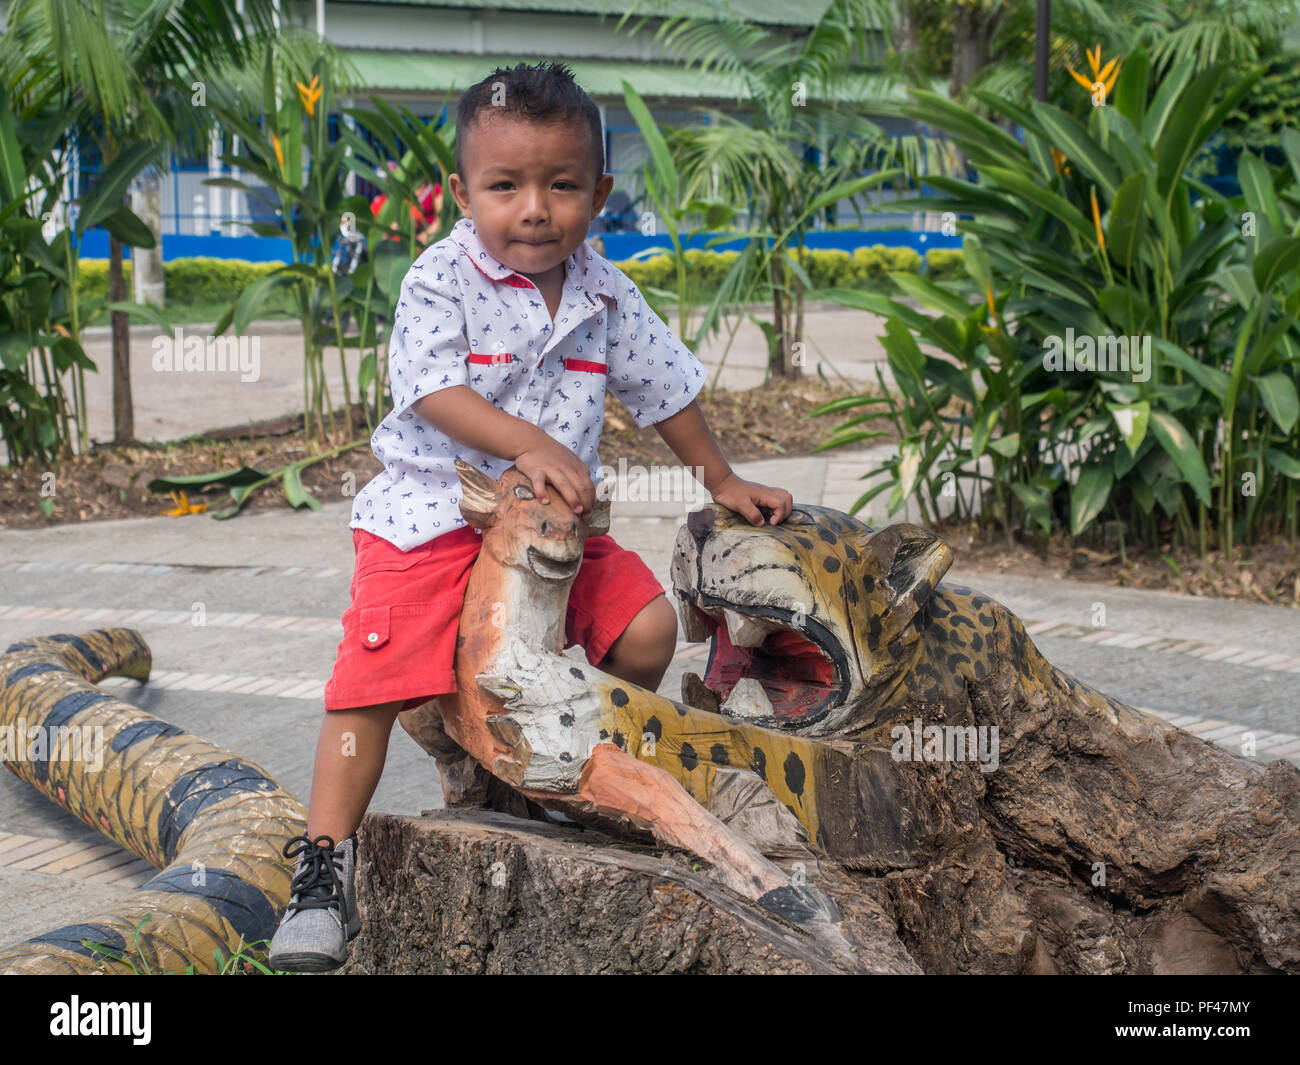 Leticia, Colombia  - March 03, 2018: Small colombian boy sitting on the wooden animal in the small village in Colombia Stock Photo